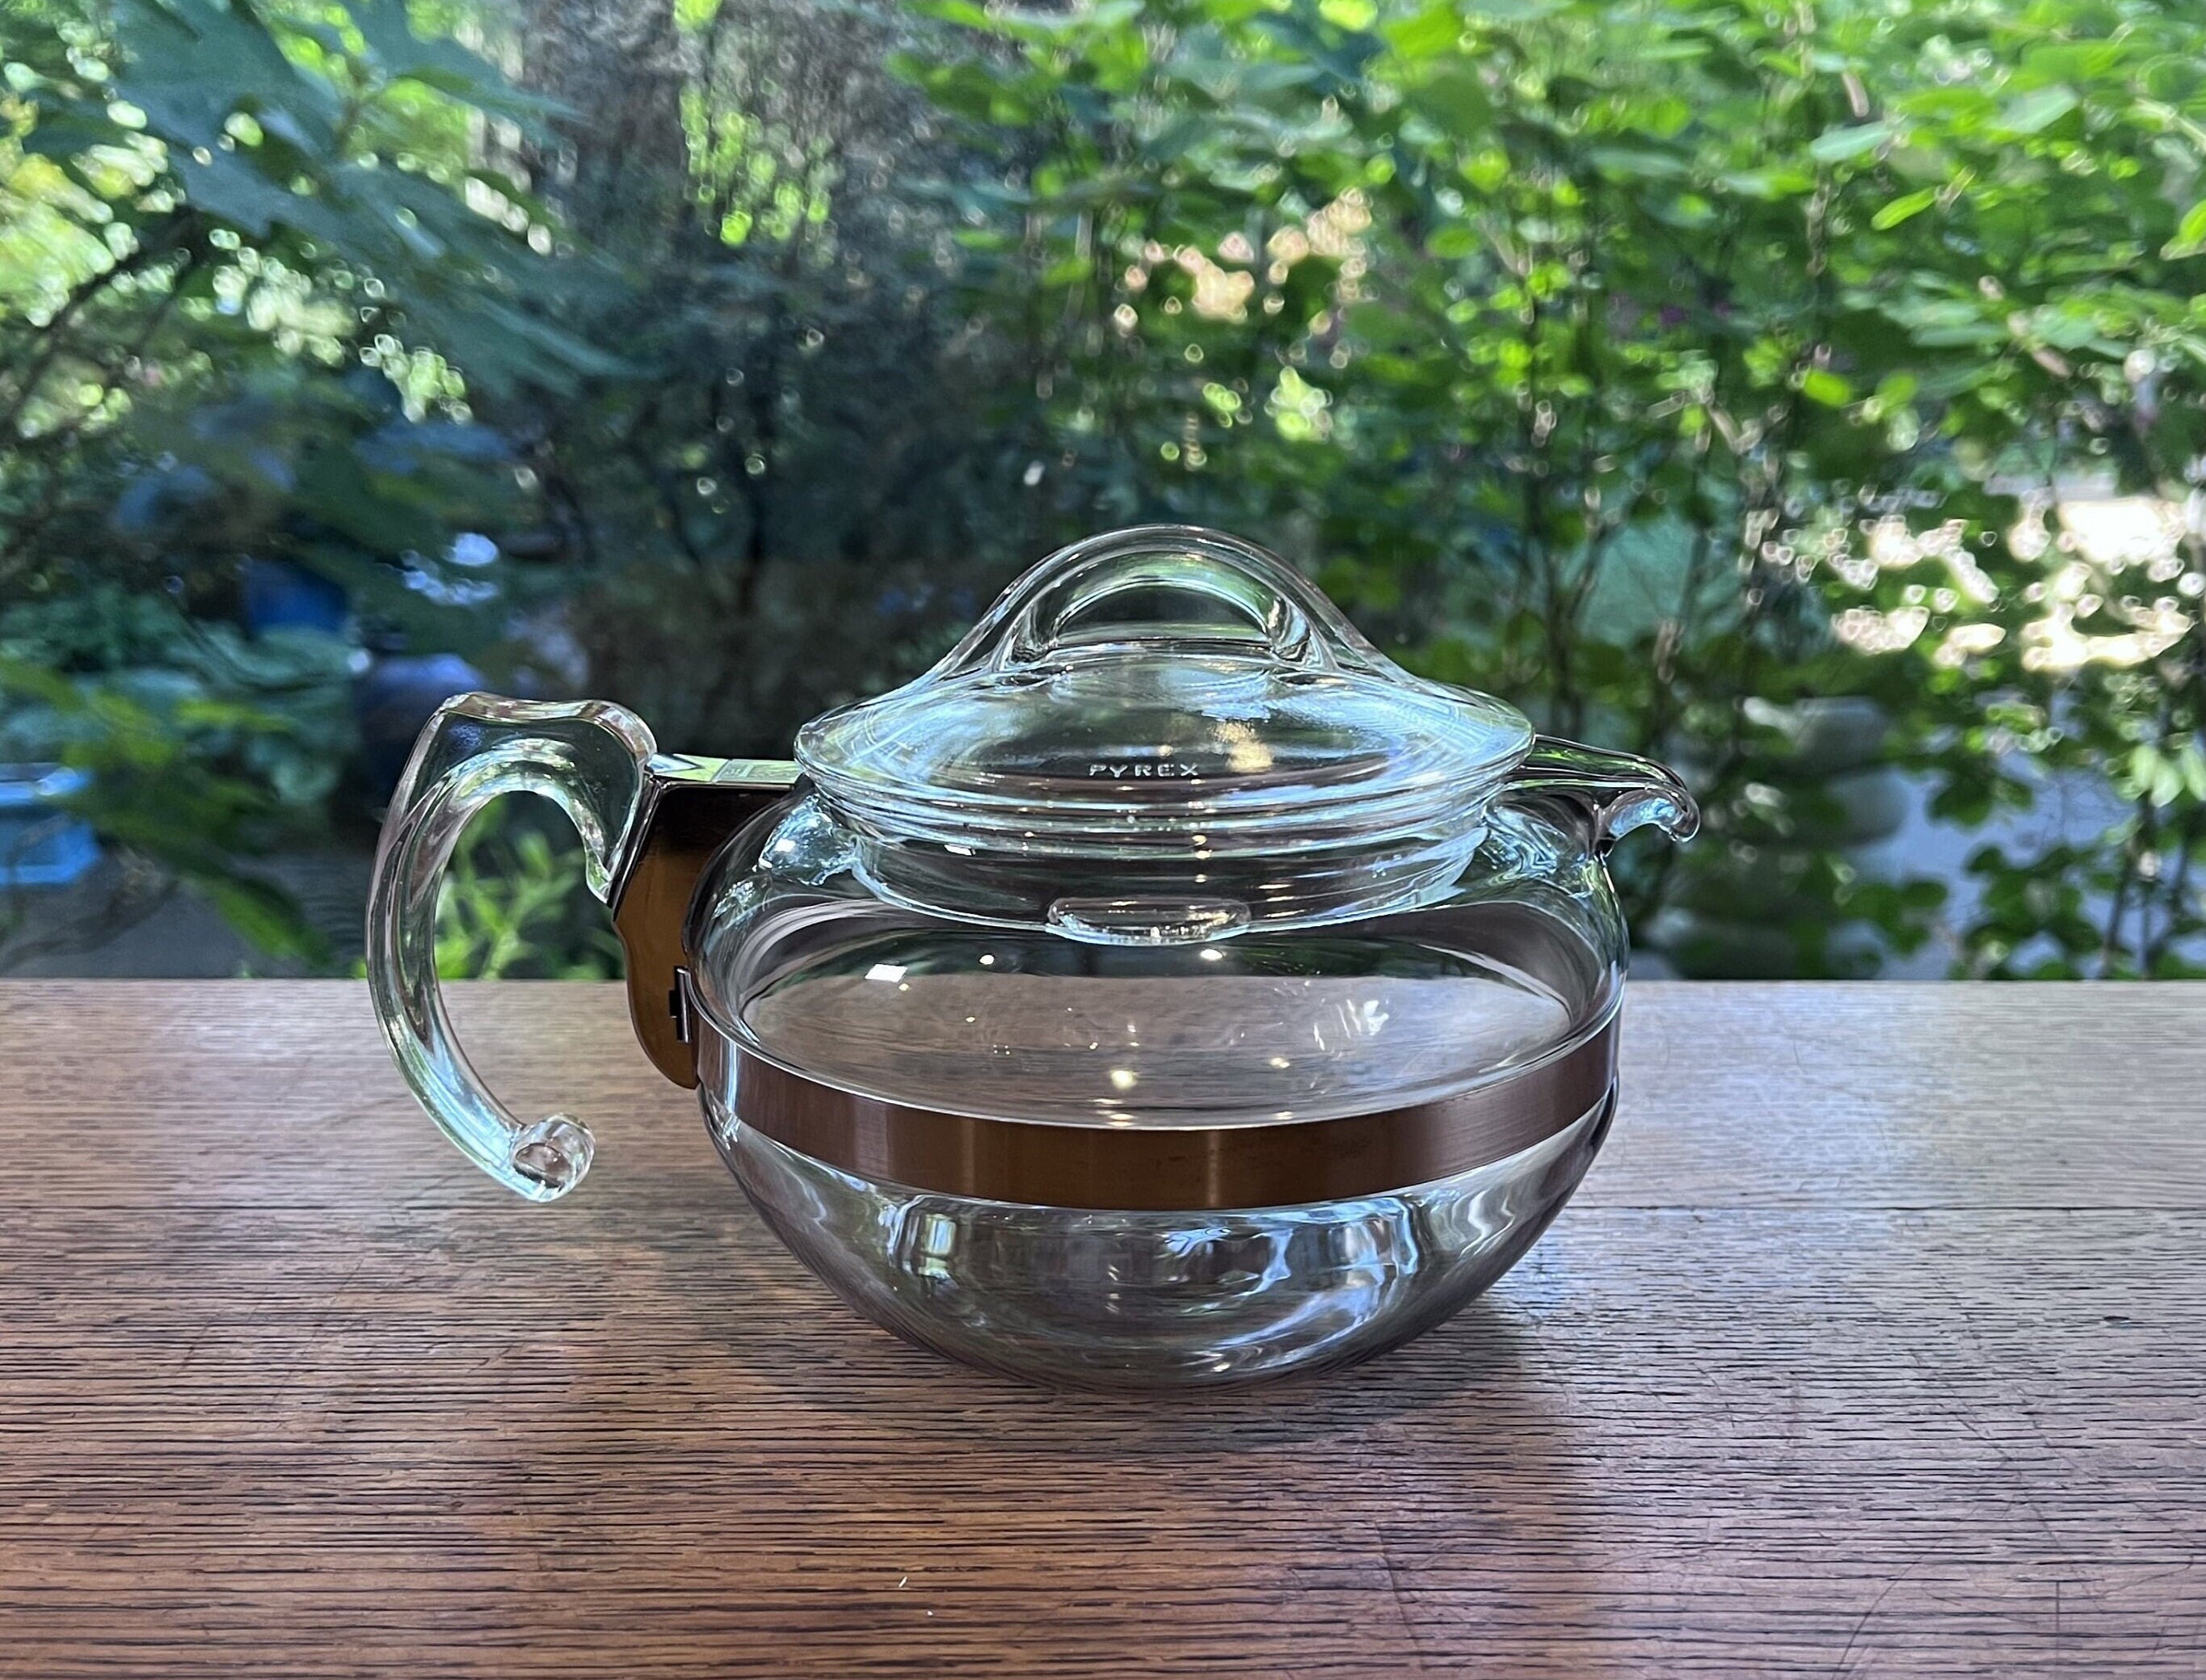 Pyrex teapot with glass infuser safe on stovetop to brew